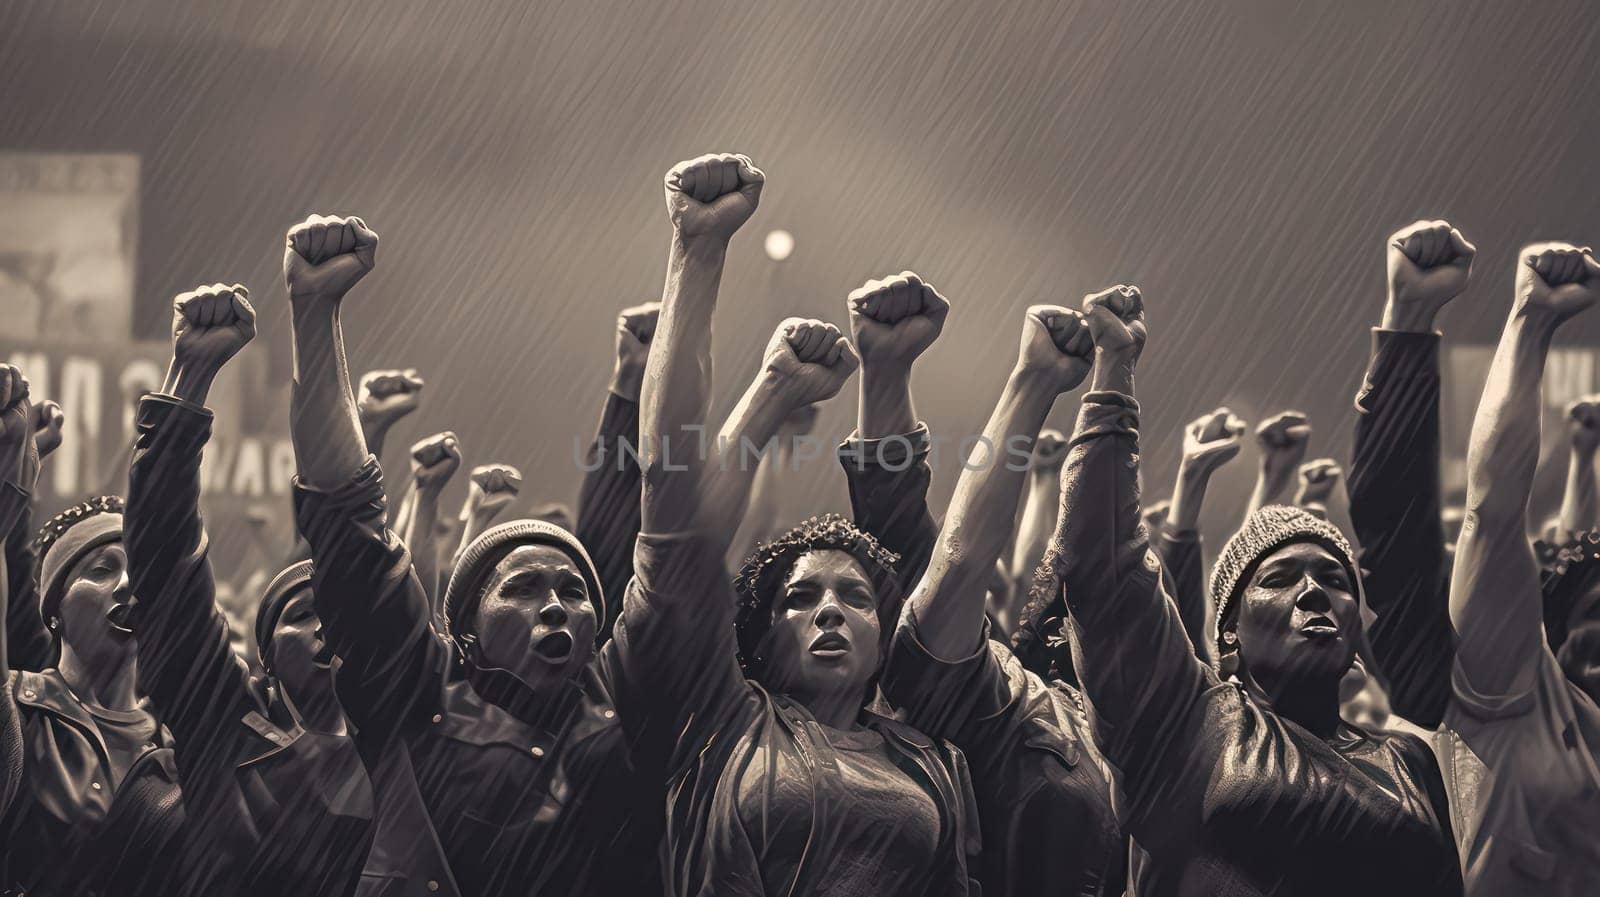 Unified and determined, a group of protestors raises fists in solidarity, making a powerful statement for justice and social change. Stand together, speak up.